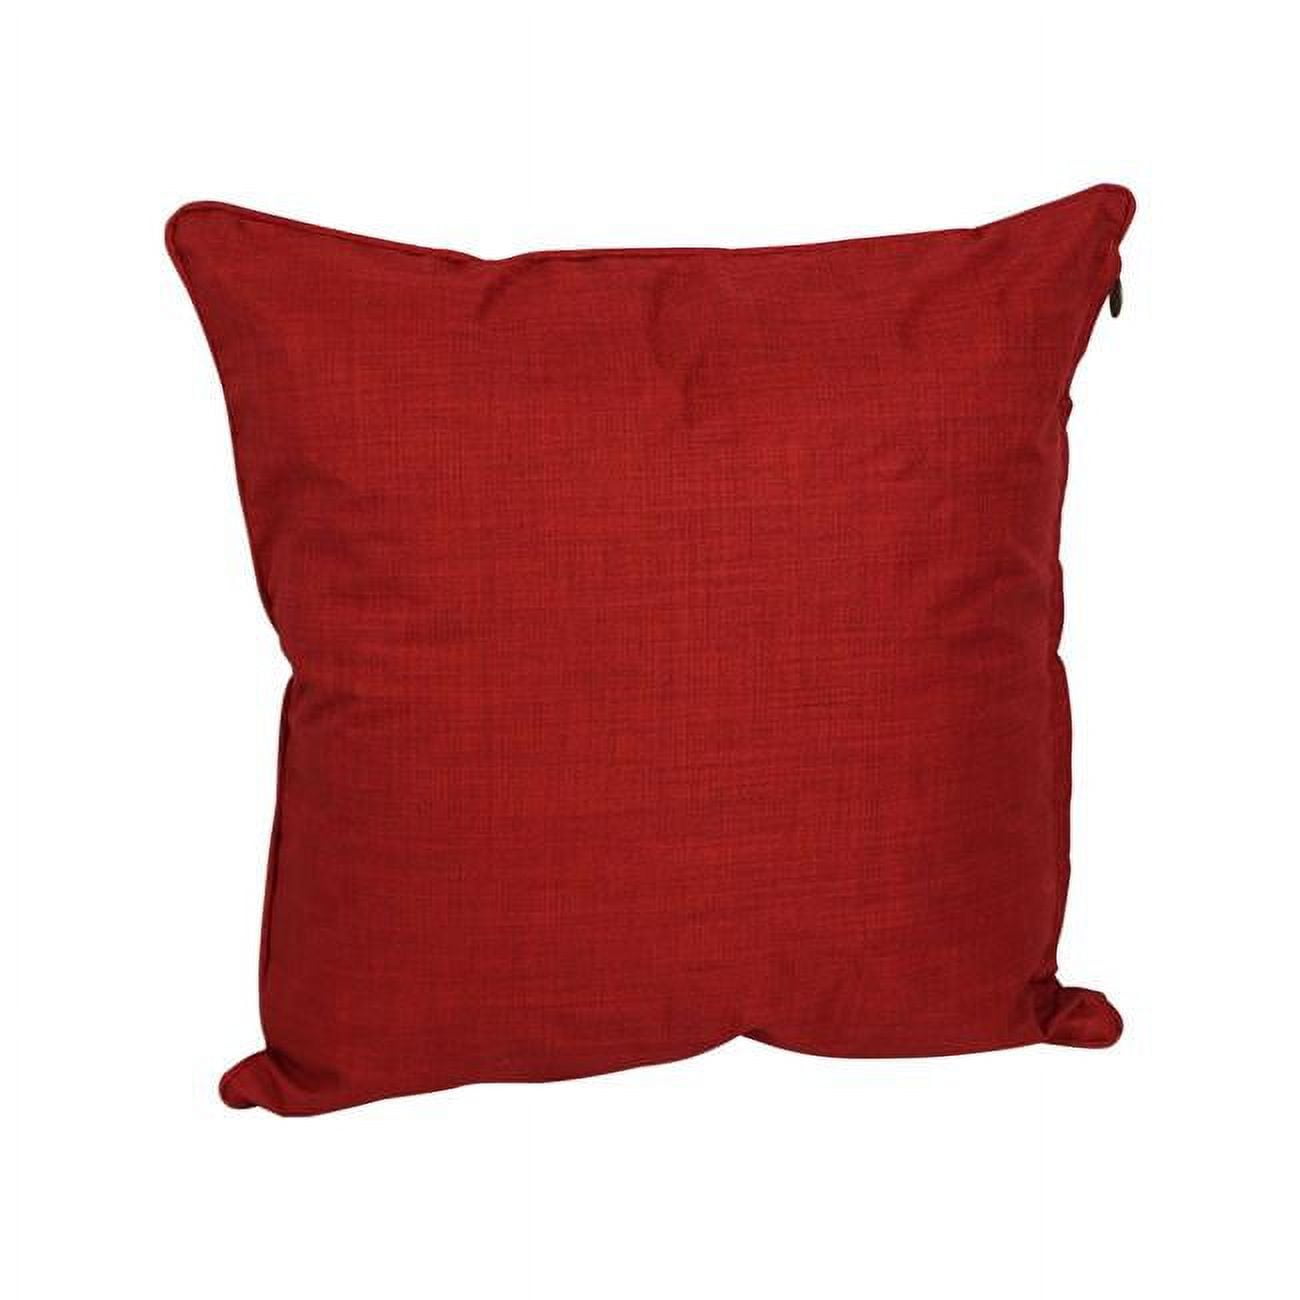 Picture of Blazing Needles 9813-CD-S1-REO-SOL-04 25 in. Double-Corded Spun Polyester Square Floor Pillow with Insert, Paprika